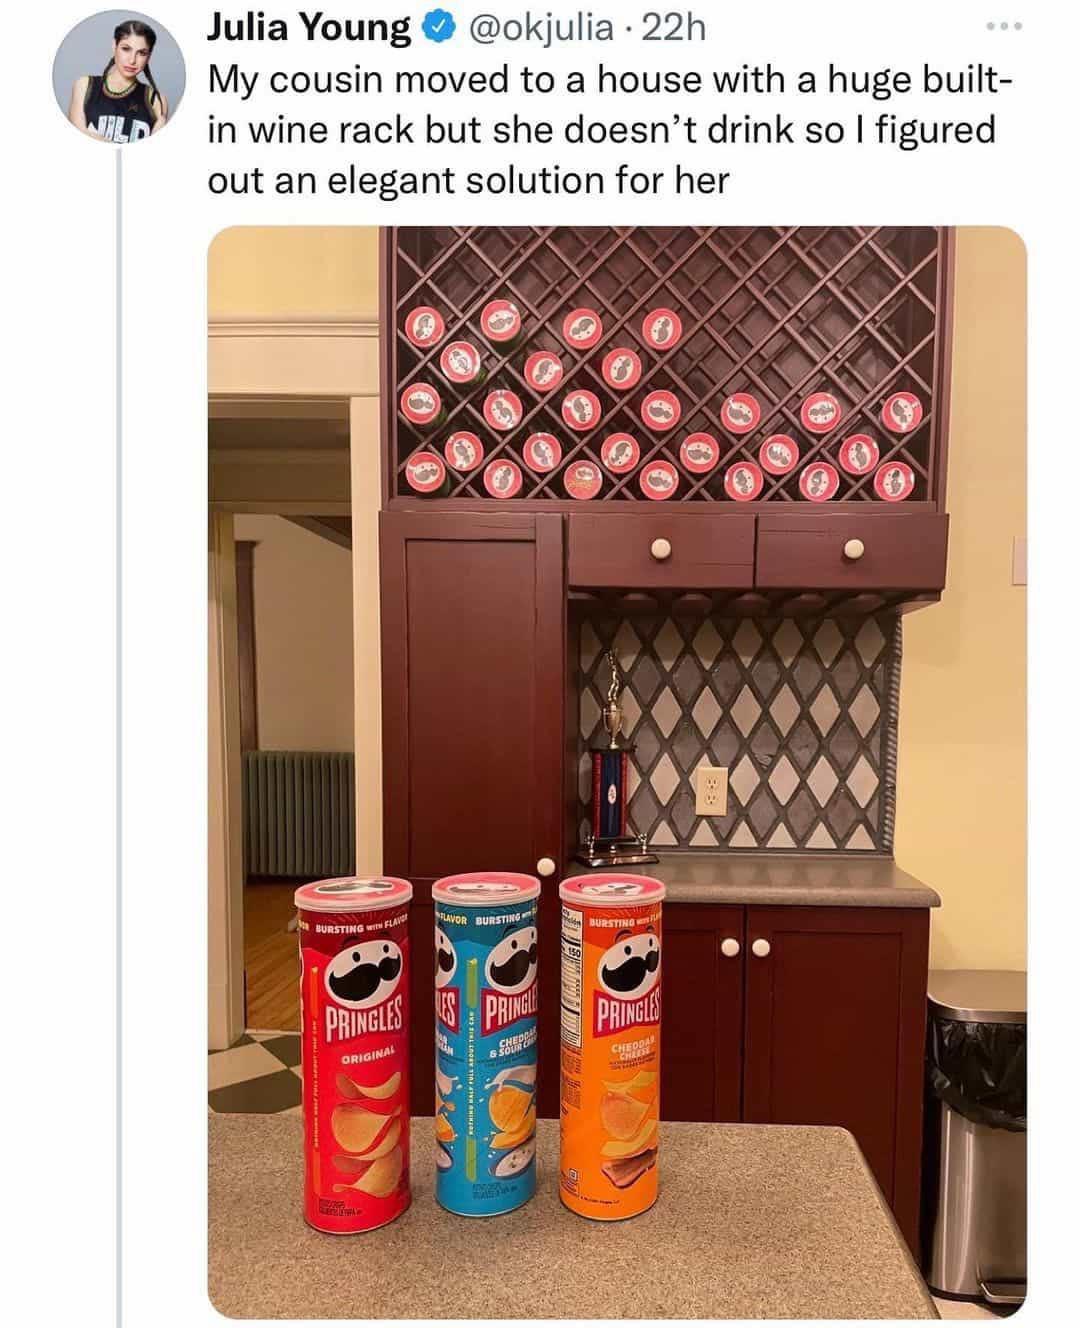 funny memes and pics - pringles in a wine rack - Julia Young . 22h 0. My cousin moved to a house with a huge built in wine rack but she doesn't drink so I figured out an elegant solution for her 106 wak Yupp Bursting With Flavo Pringles Es Original P Sel 